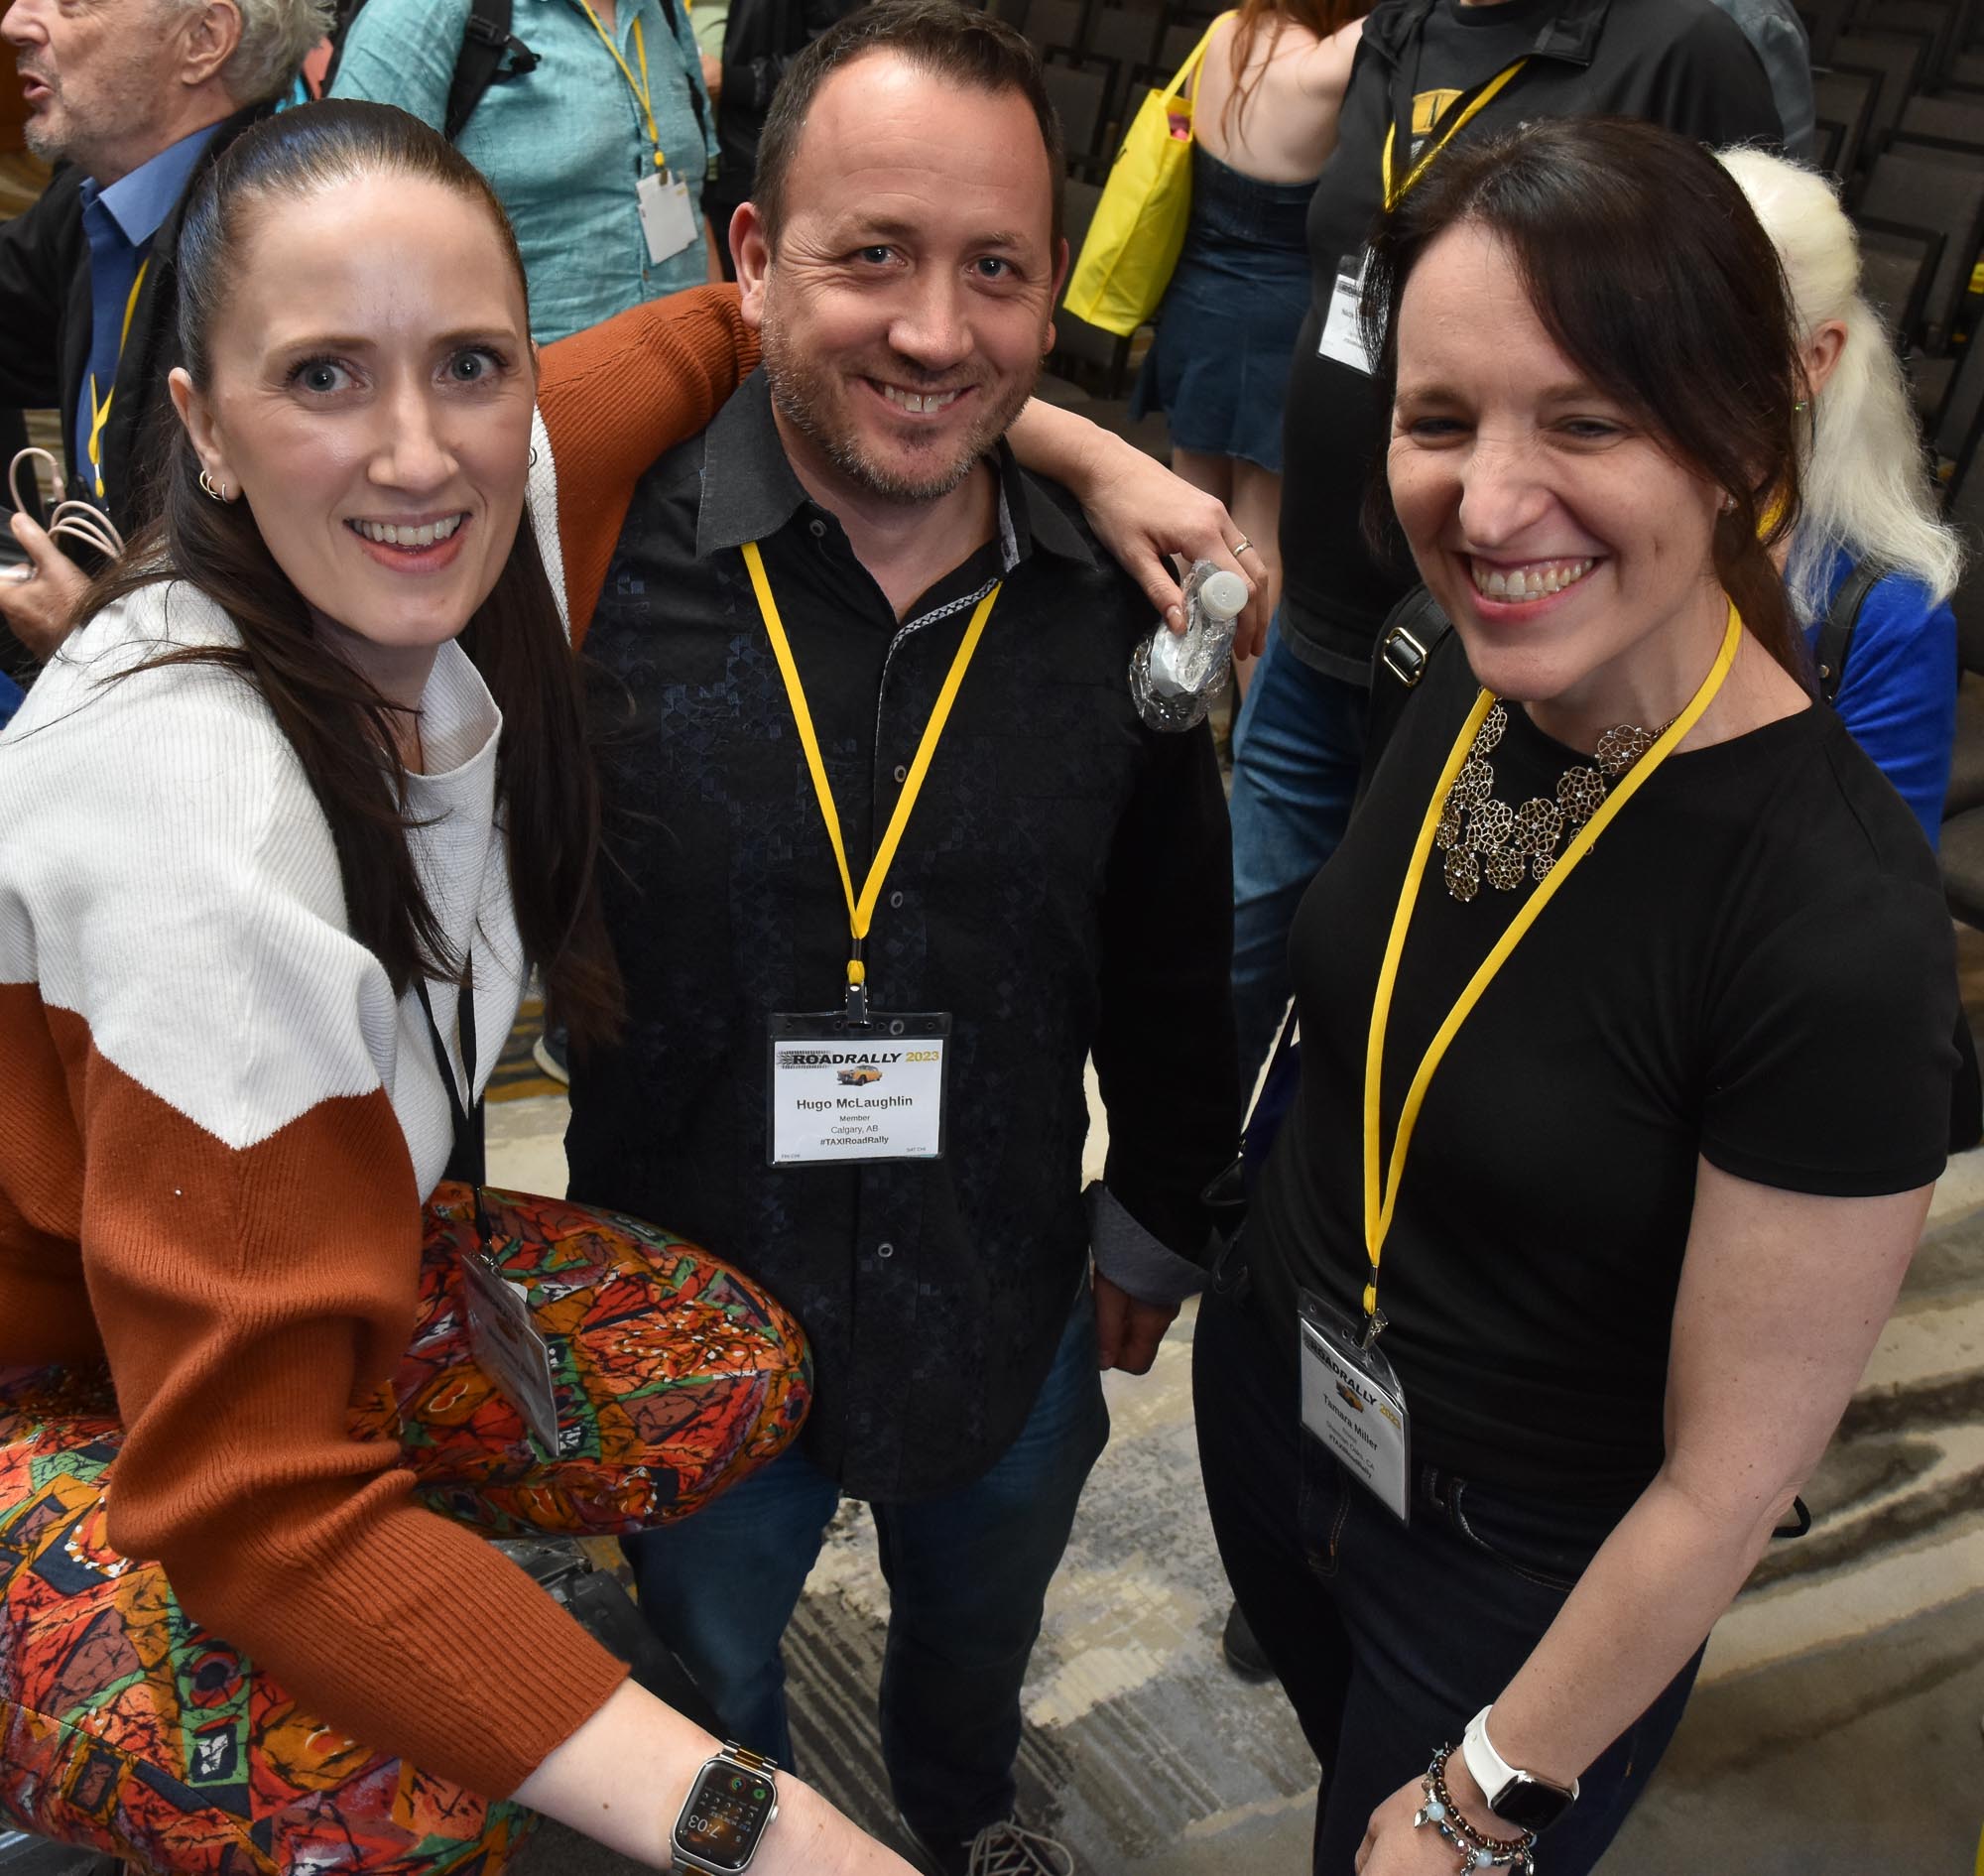 Music Licensing Executive Stephanie Reid (left) hangs out with TAXI members: Hugo McLaughlin and Tamara Miller after a panel wraps up.